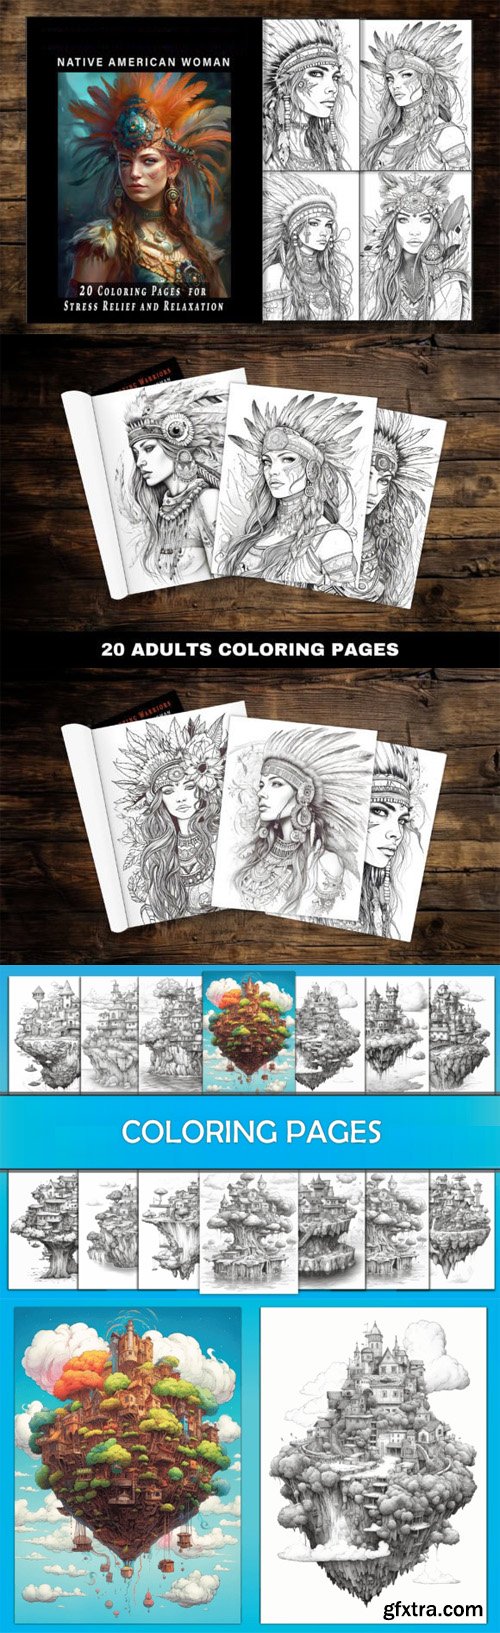 Awesome Coloring Pages Collection for Adults